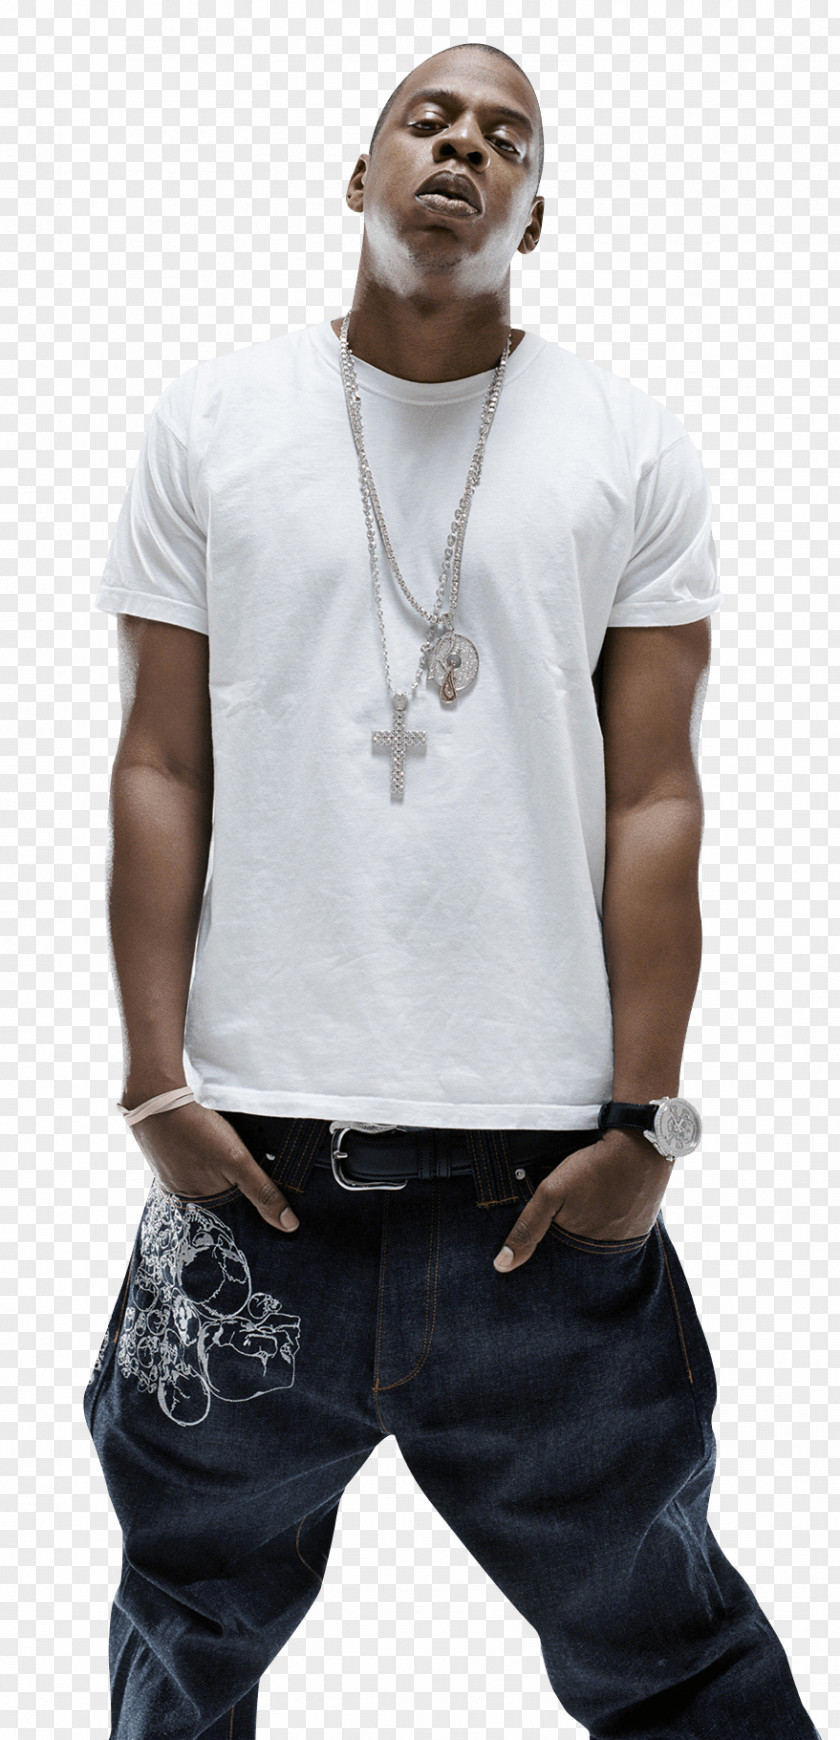 Jay Z Bring It On: The Best Of Jay-Z Rapper PNG of Rapper, big shawl clipart PNG